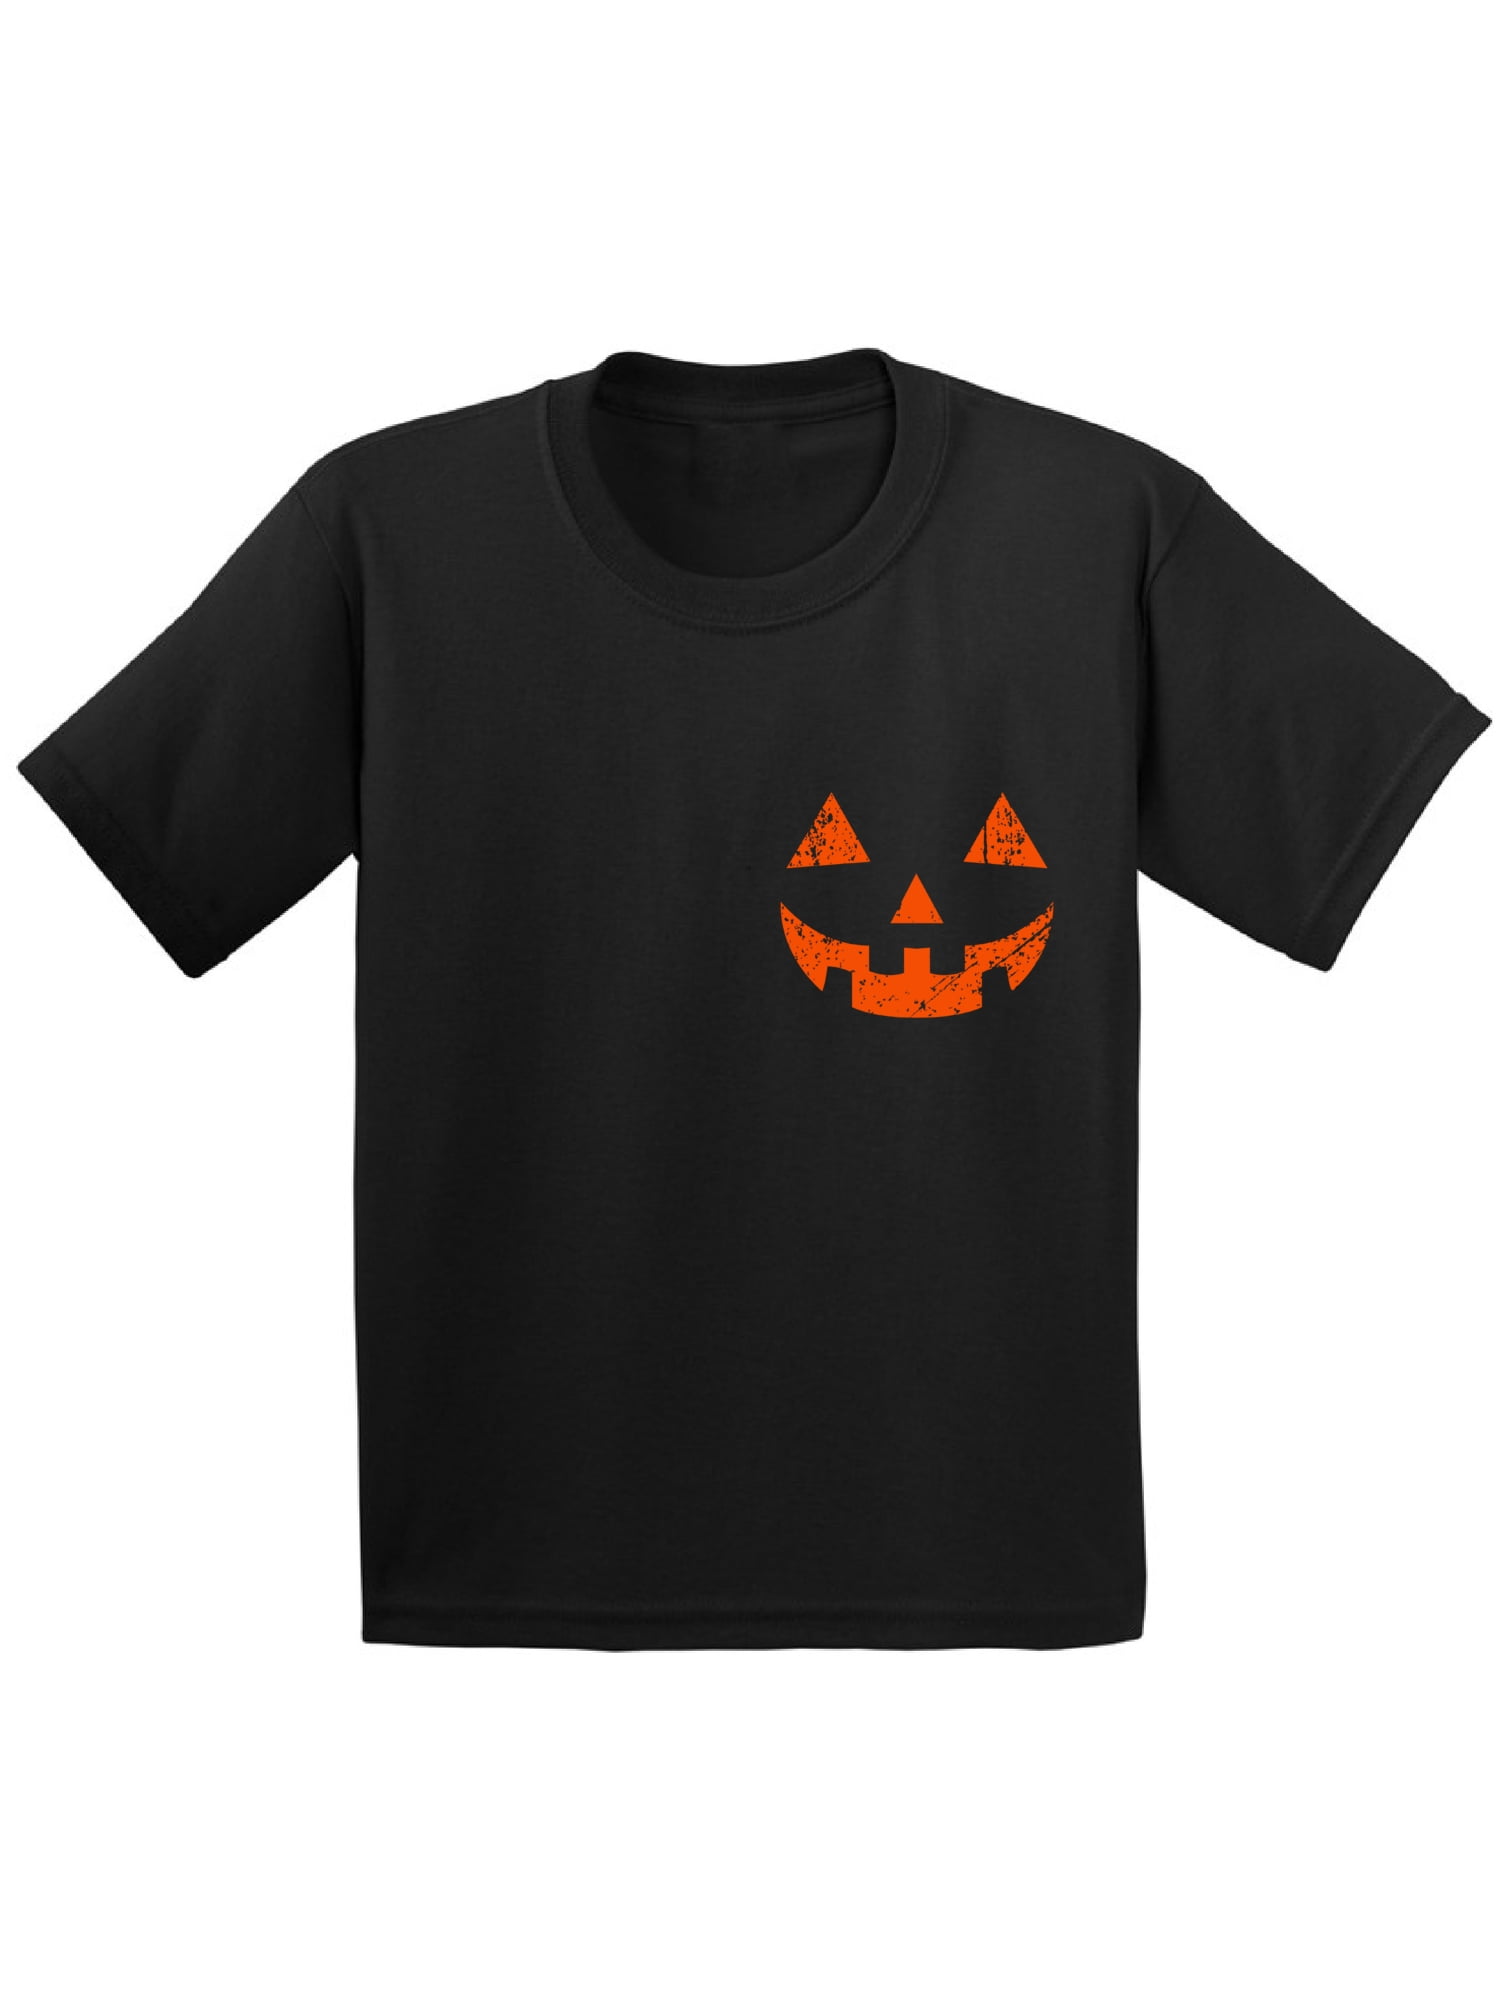 Scary Face Kids T-Shirt